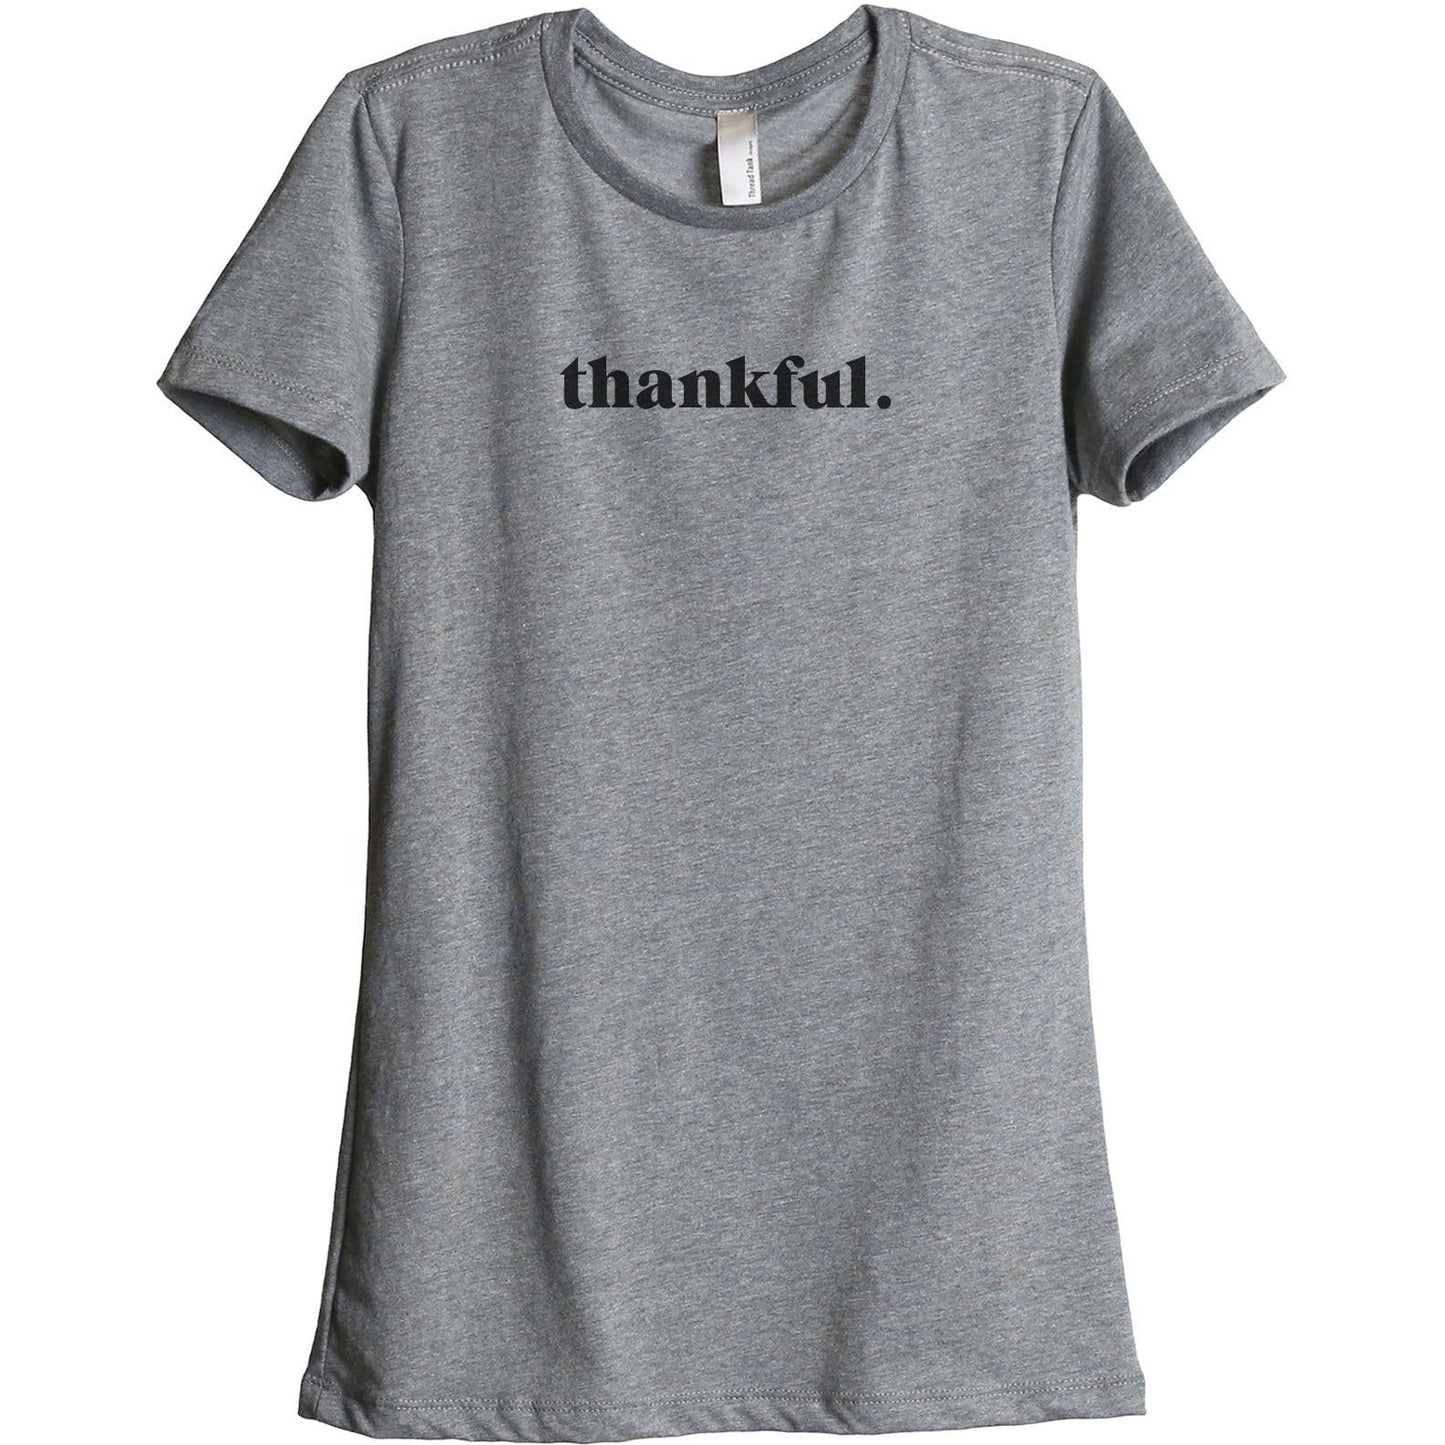 Thankful - Stories You Can Wear